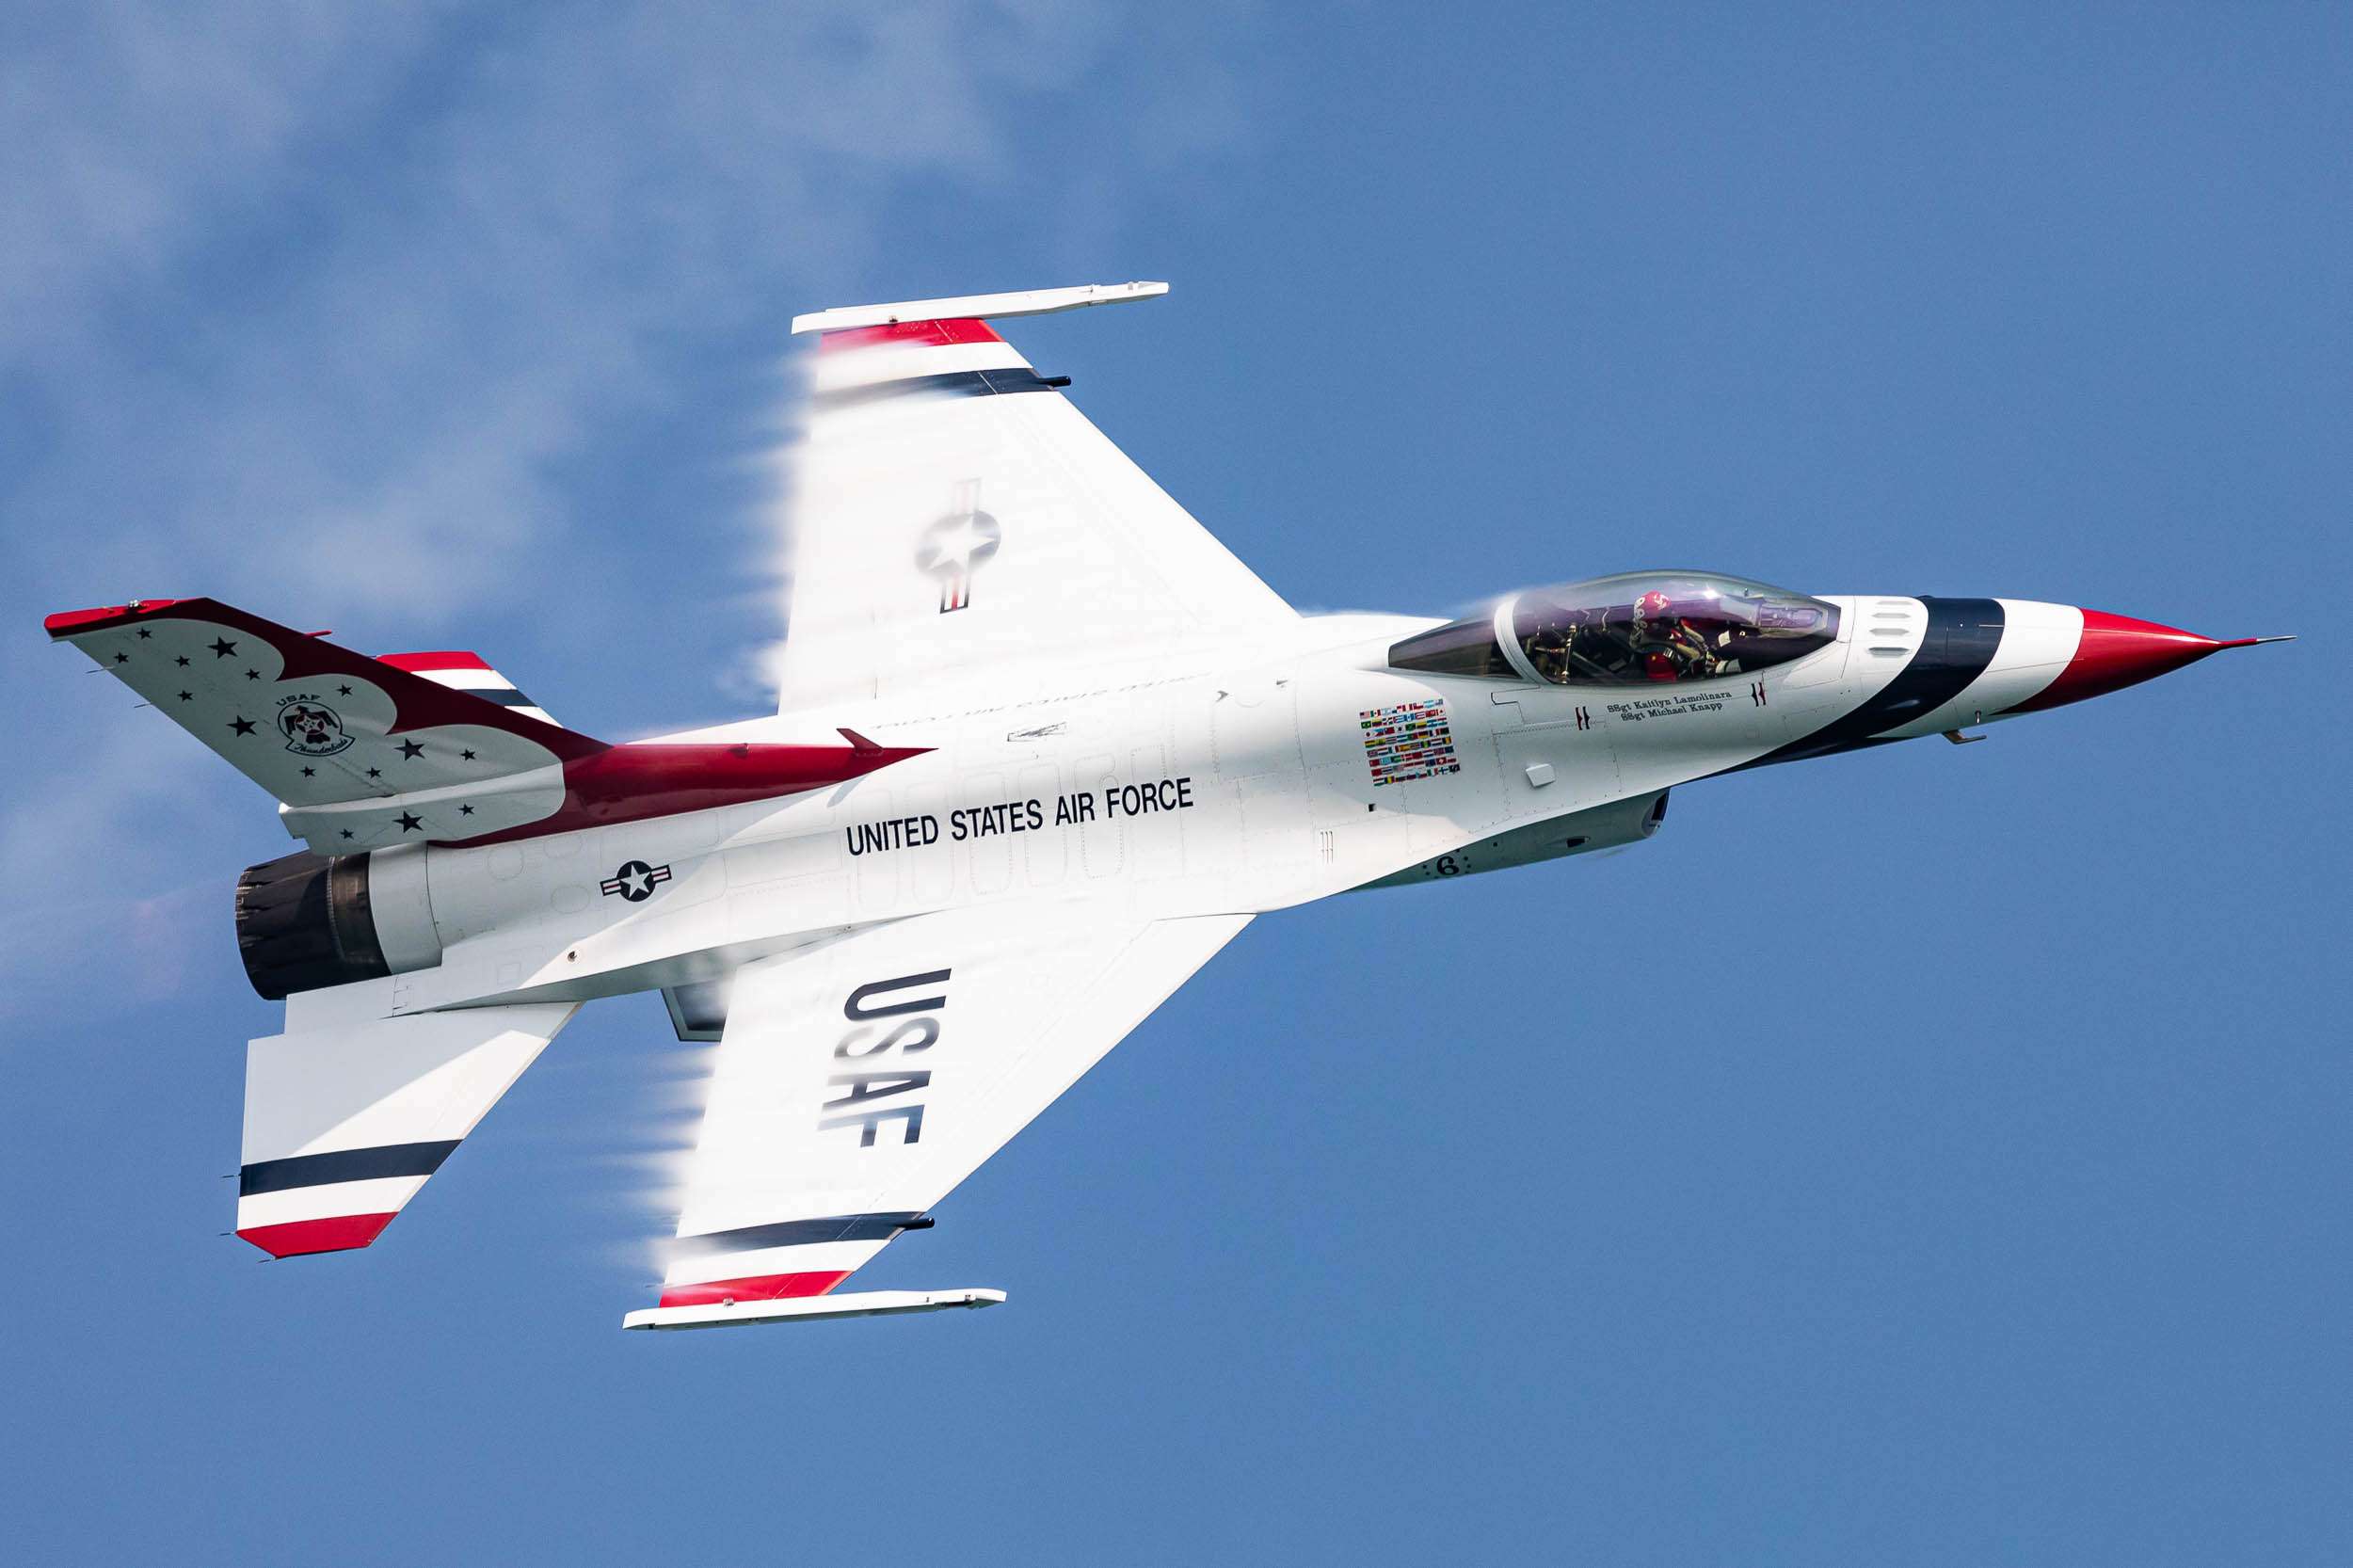 A US Air Force Thunderbird jet flying at high speed with vapor on its wings